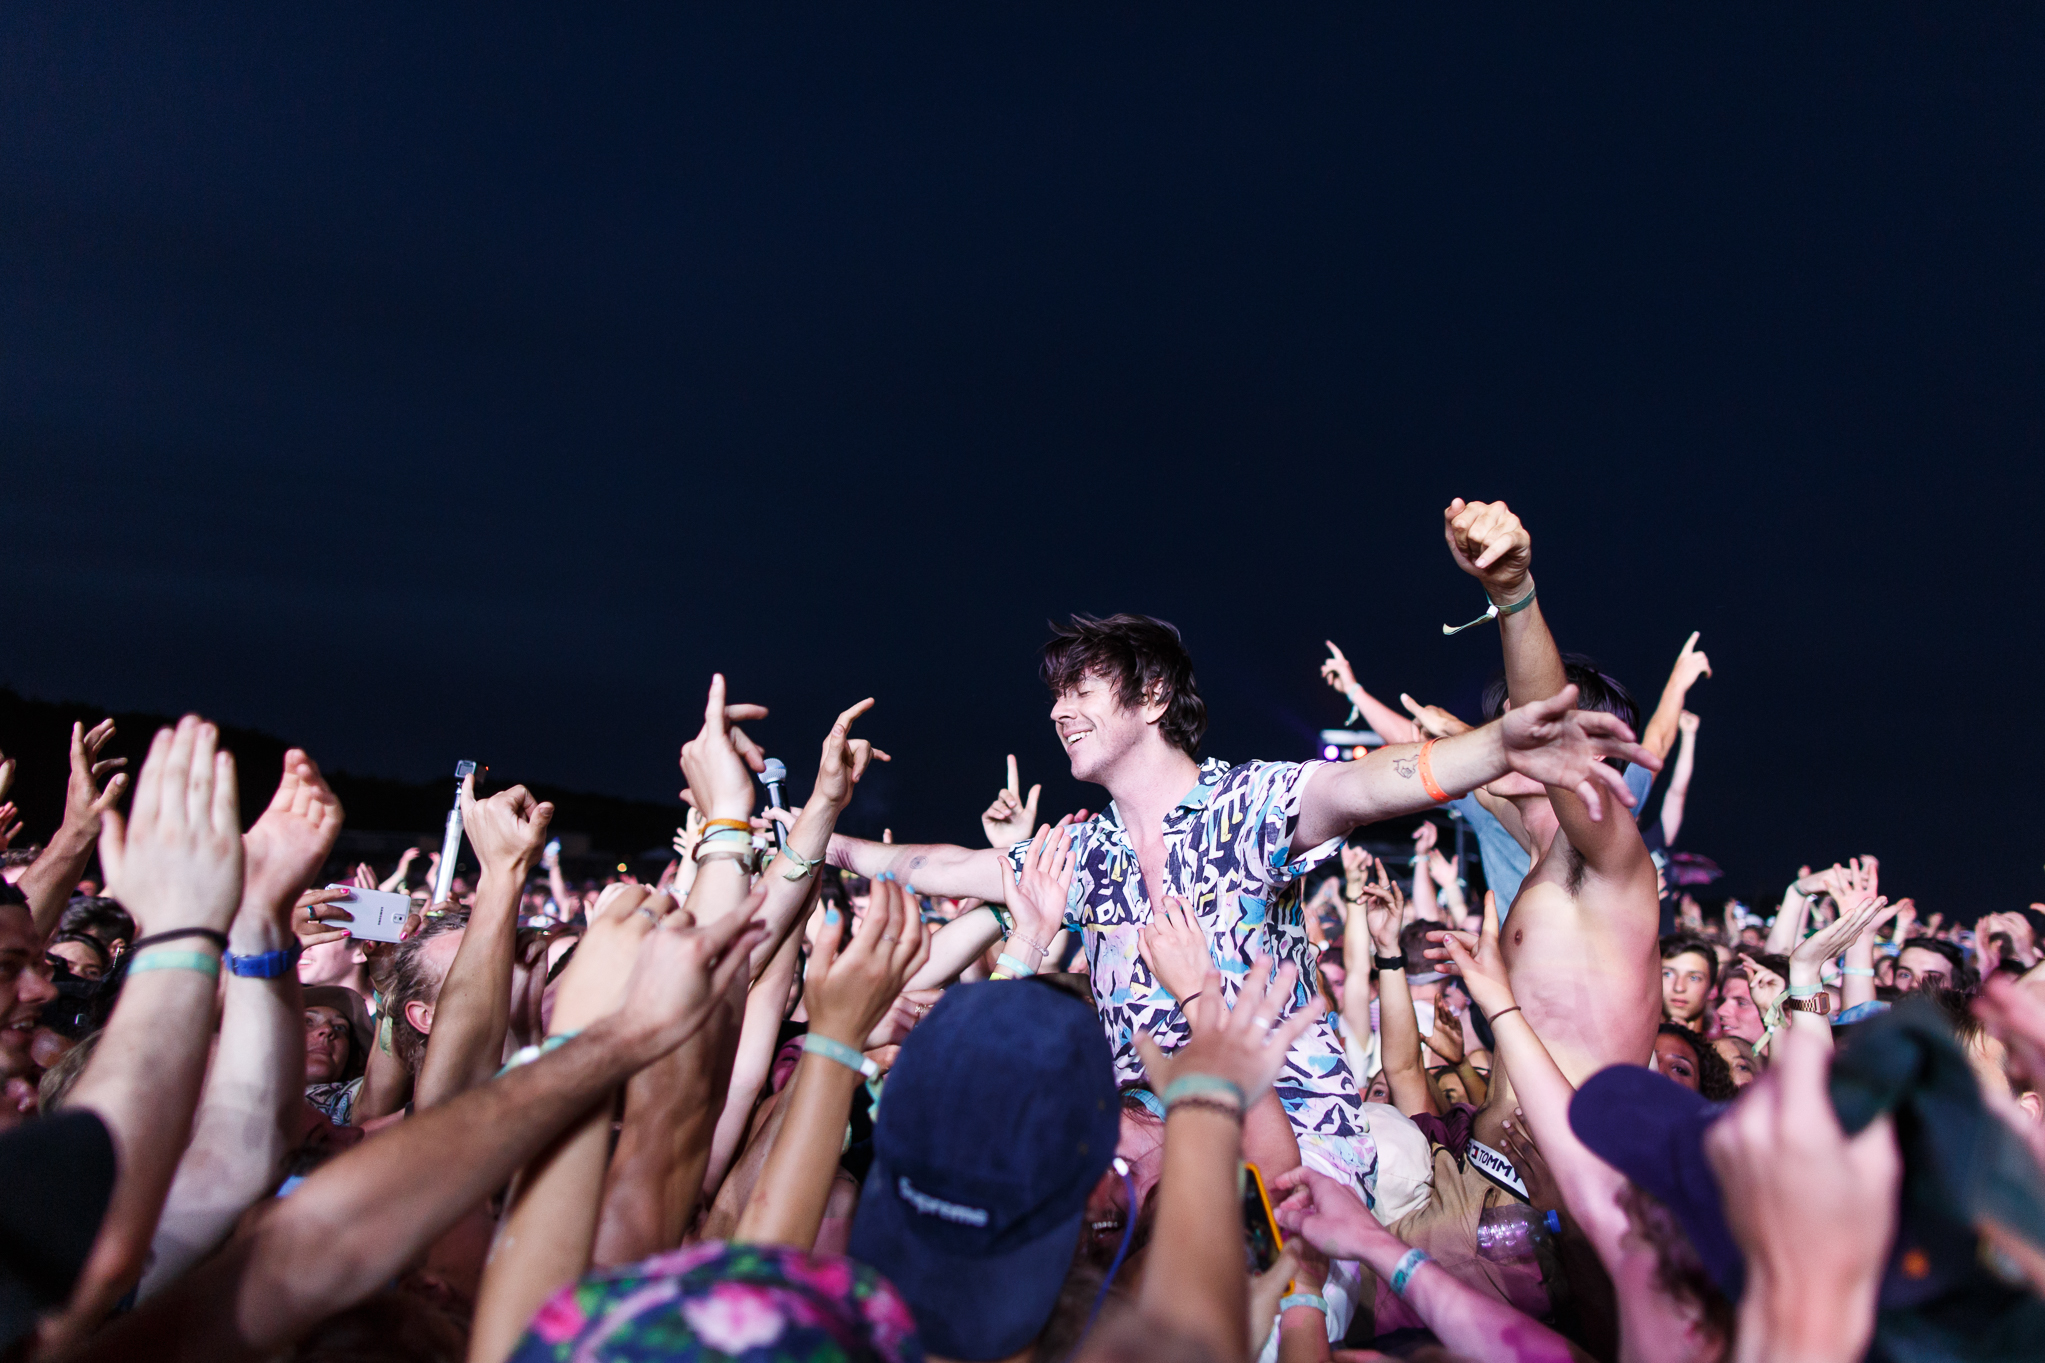 Crowd surfing at Beyond the Valley music festival.